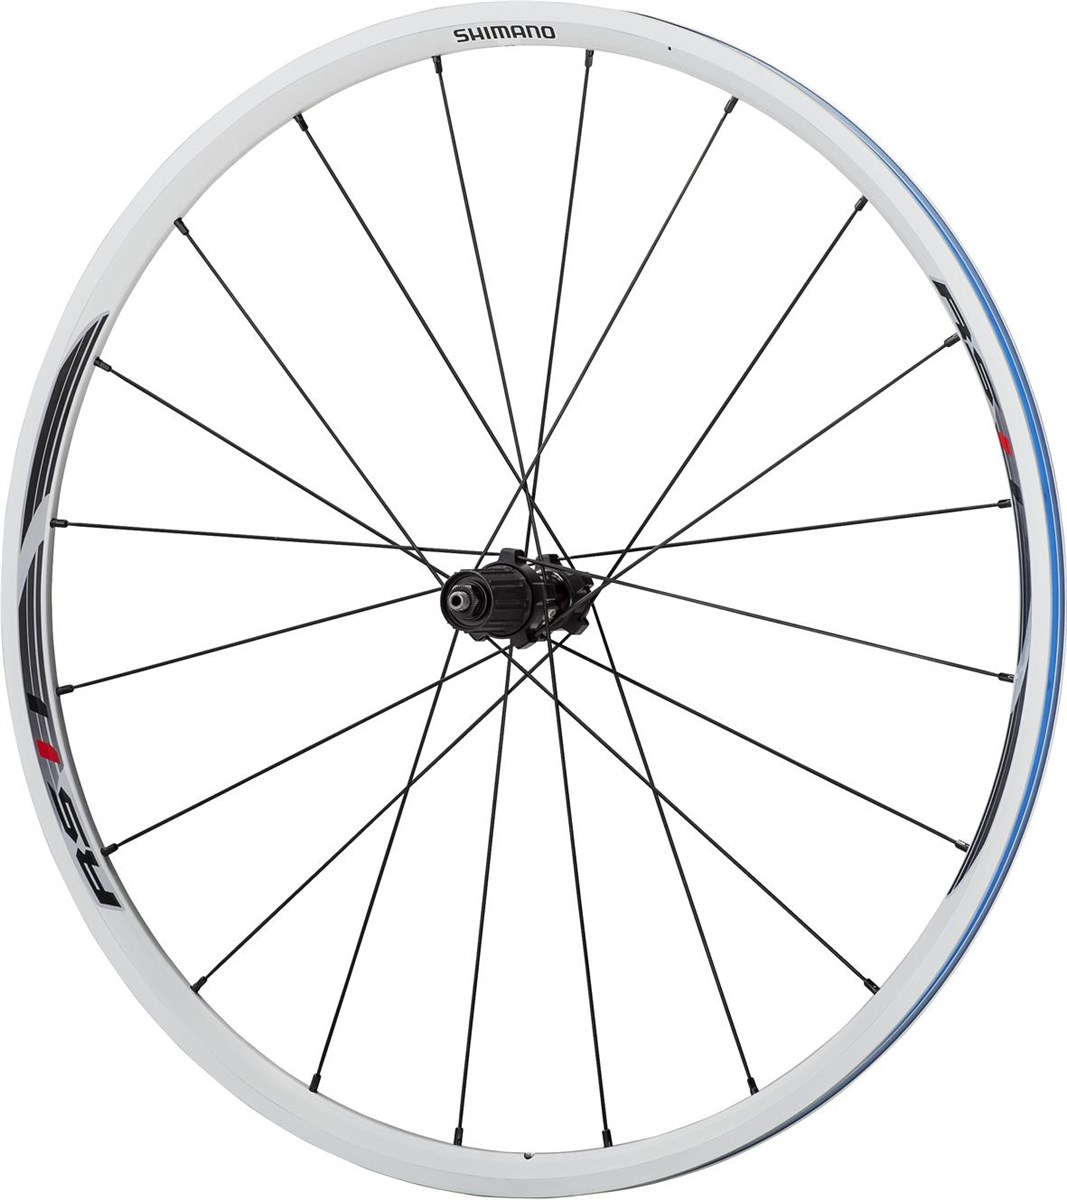 Shimano WH-RS11 Wheel, Clincher 24 mm, 11-Speed, Silver, Rear product image